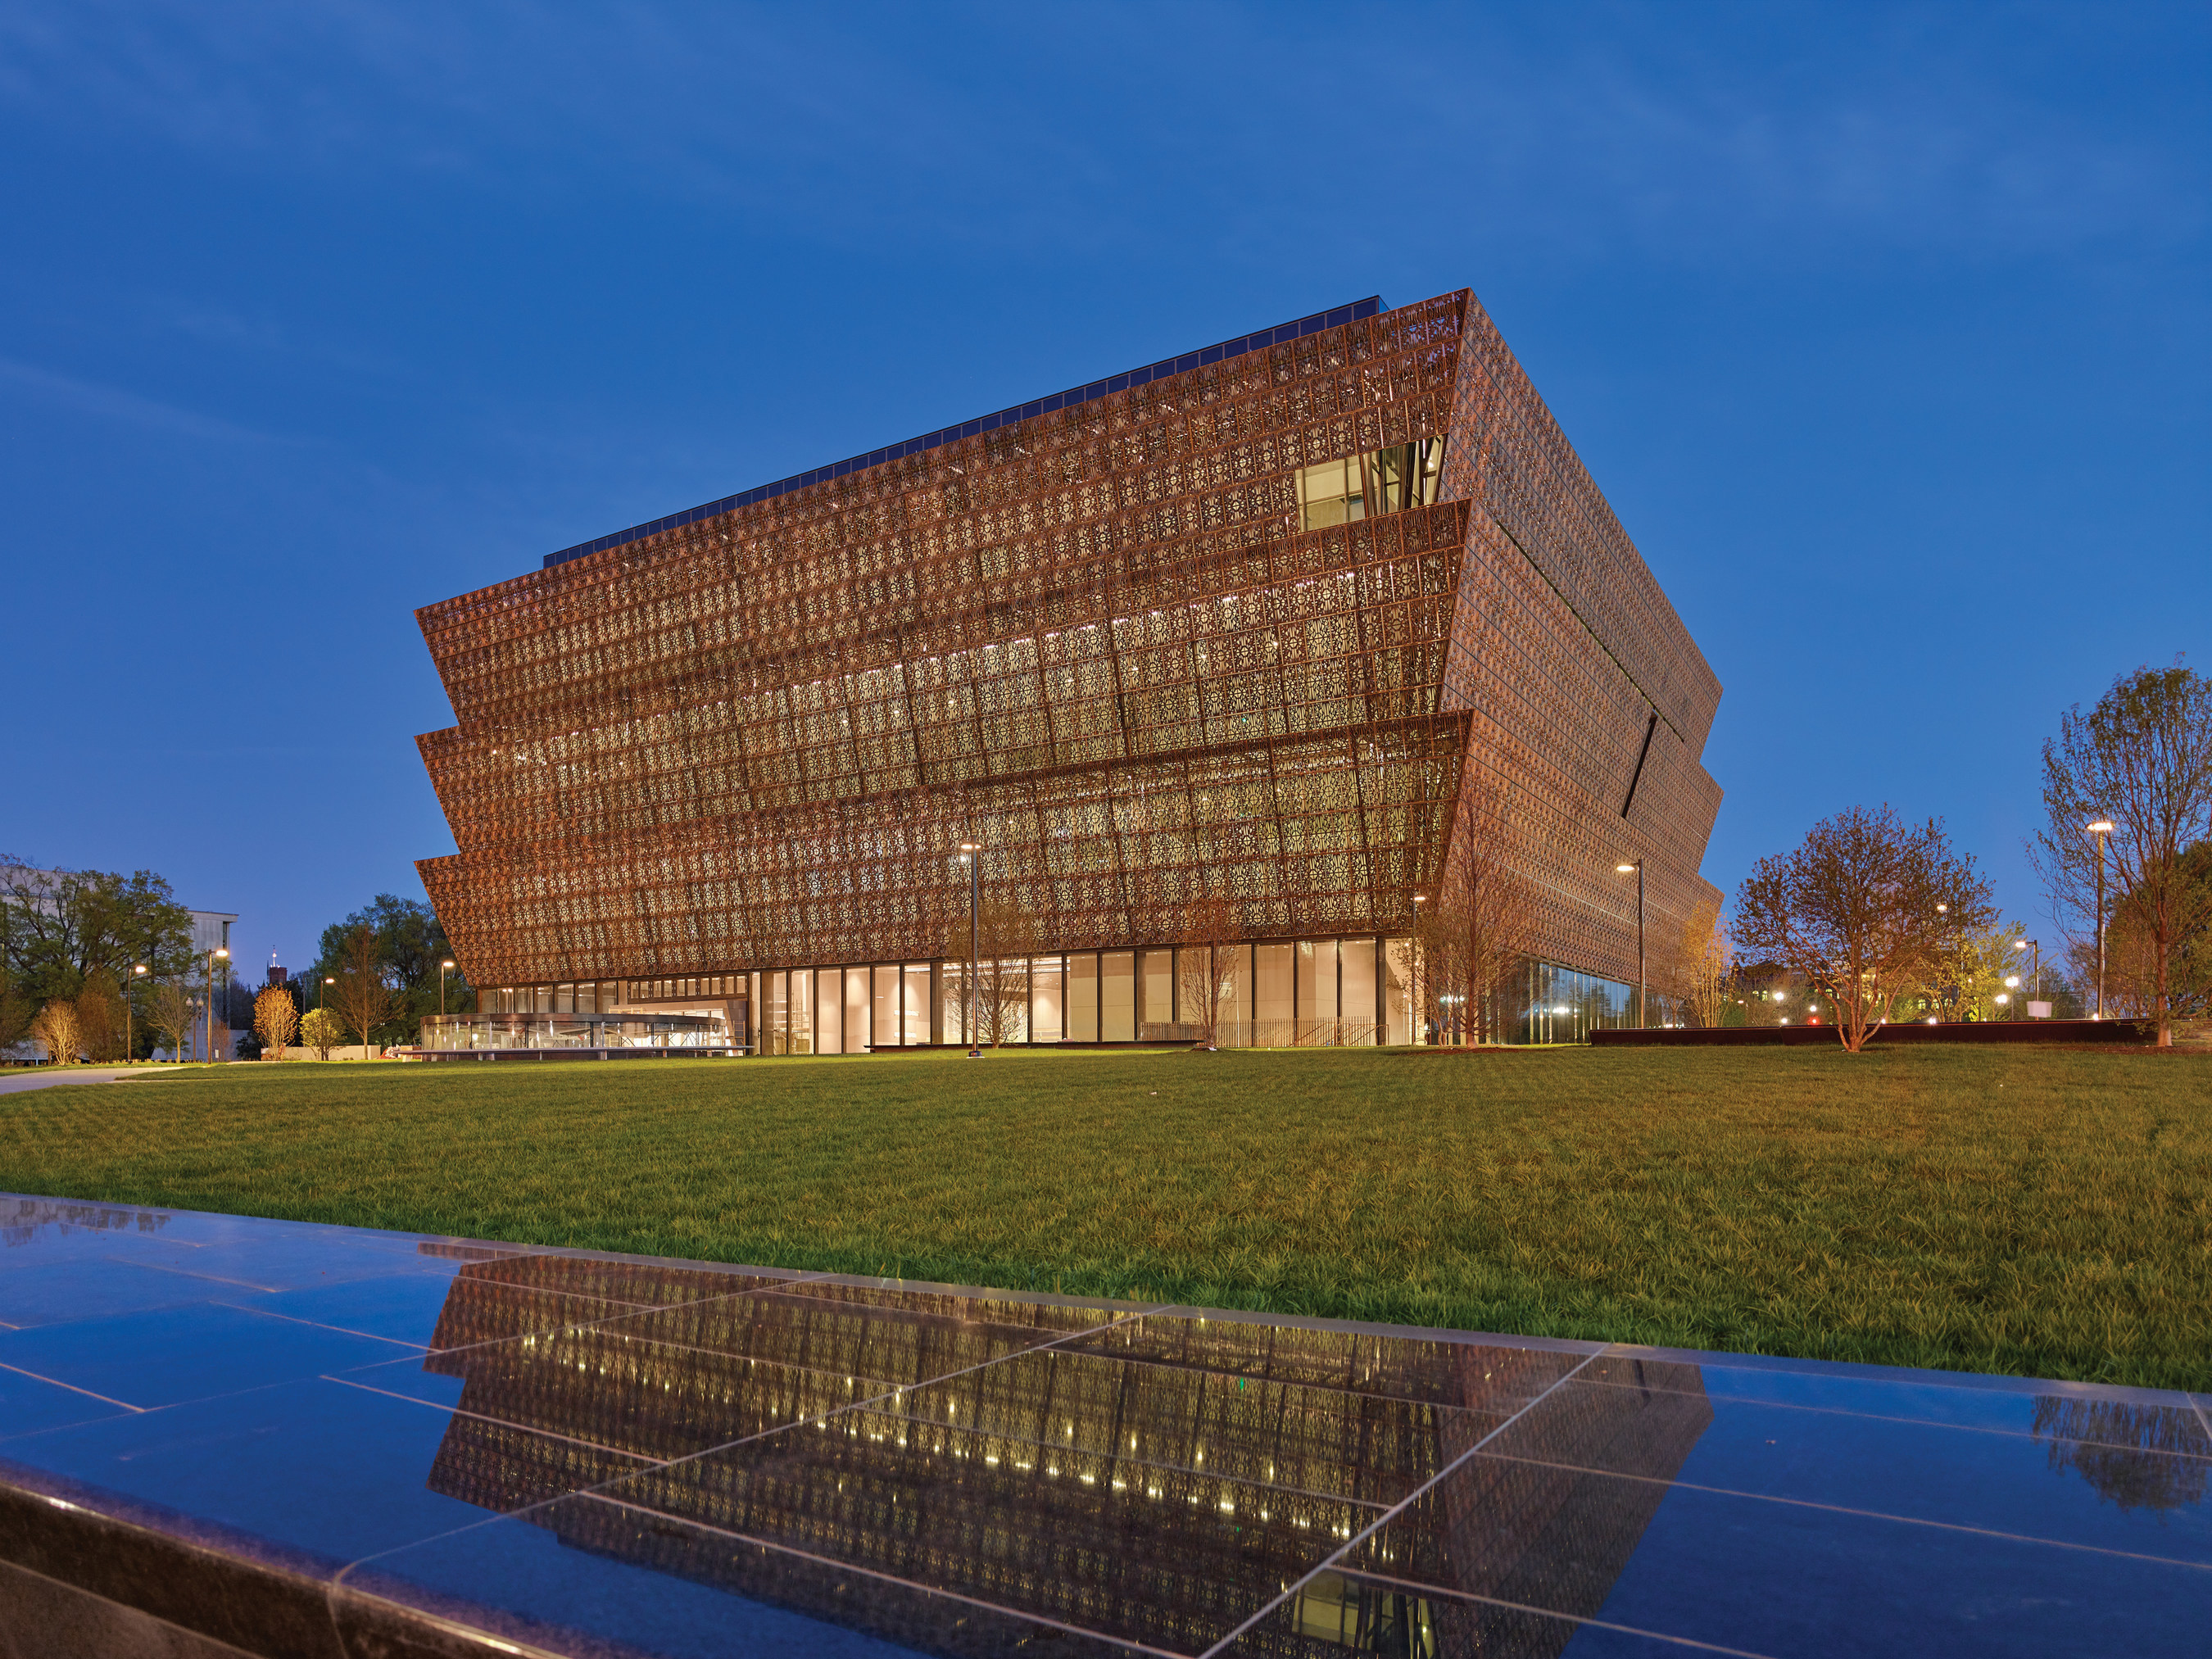 Lowe's donates $1 million to the Smithsonian's National Museum of African American History and Culture